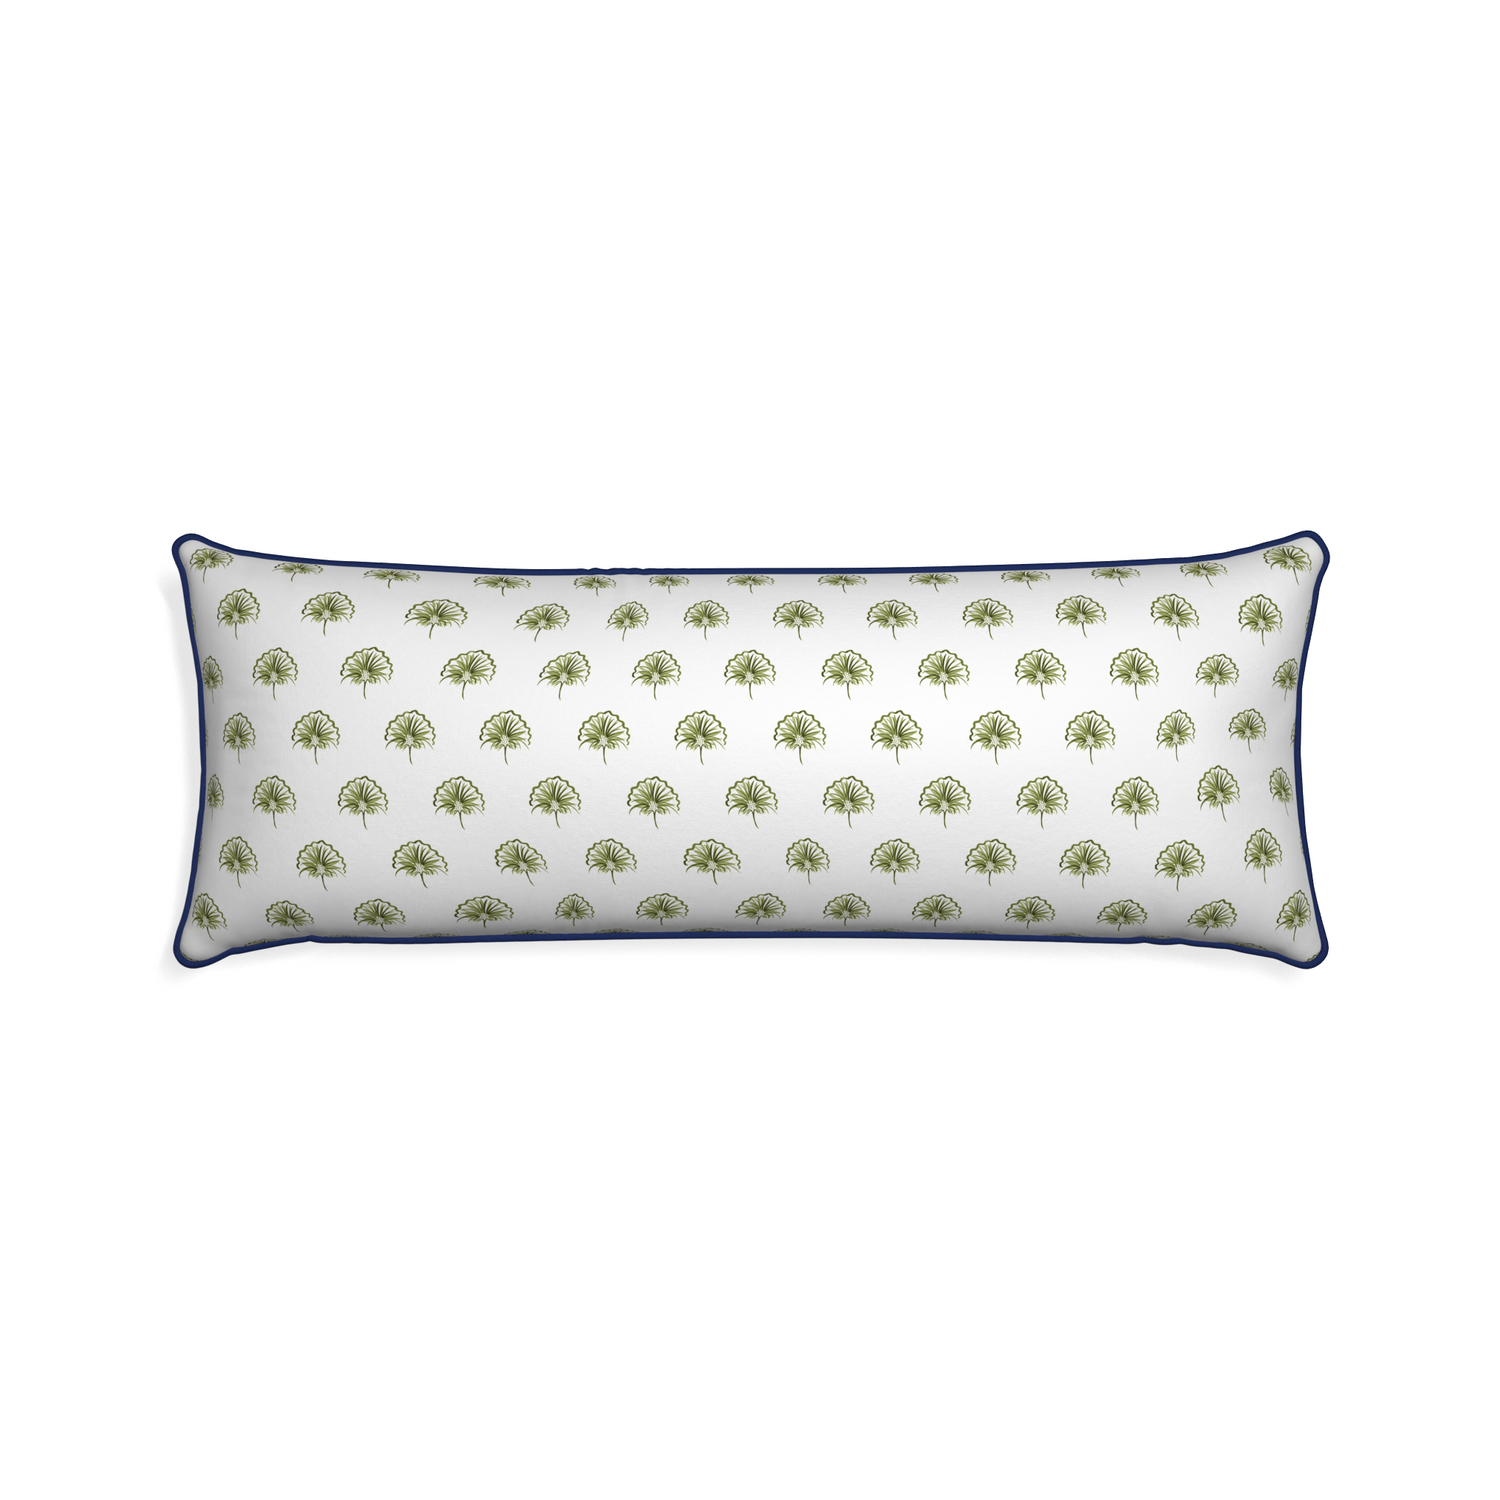 Xl-lumbar penelope moss custom pillow with midnight piping on white background